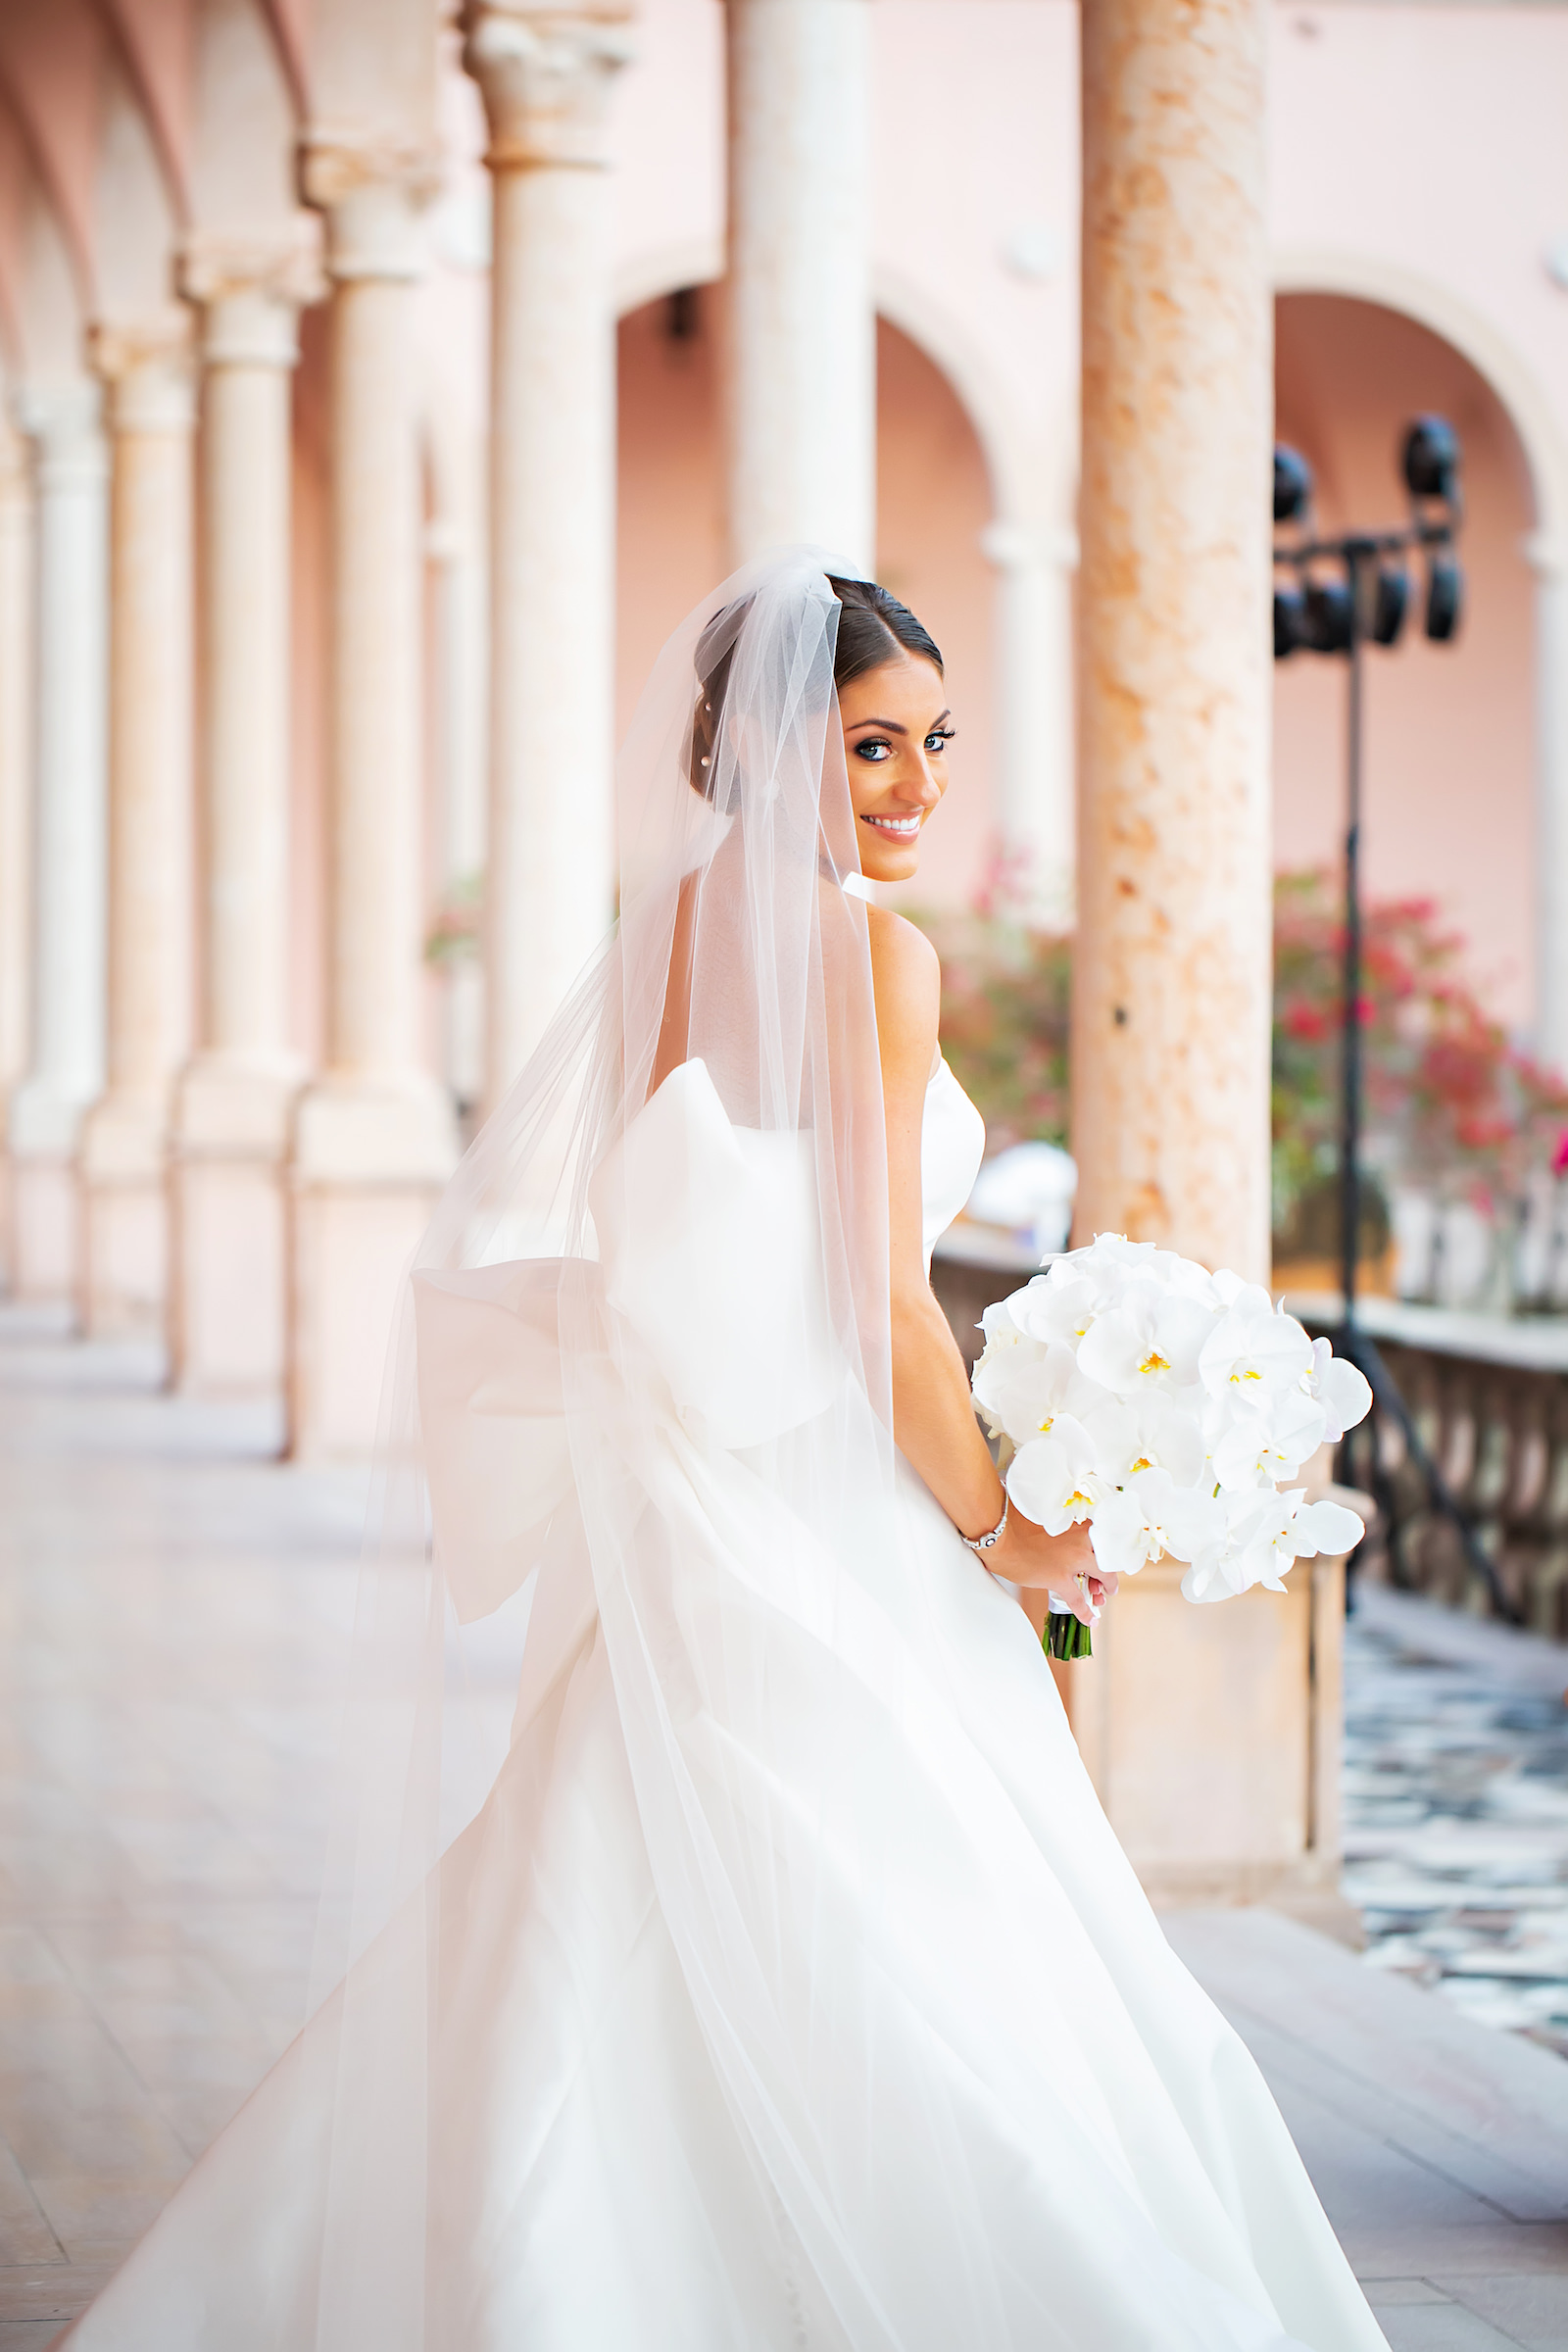 Luxurious Modern Chic Bride Beauty Portrait | Tampa Bay Wedding Photographer Limelight Photography